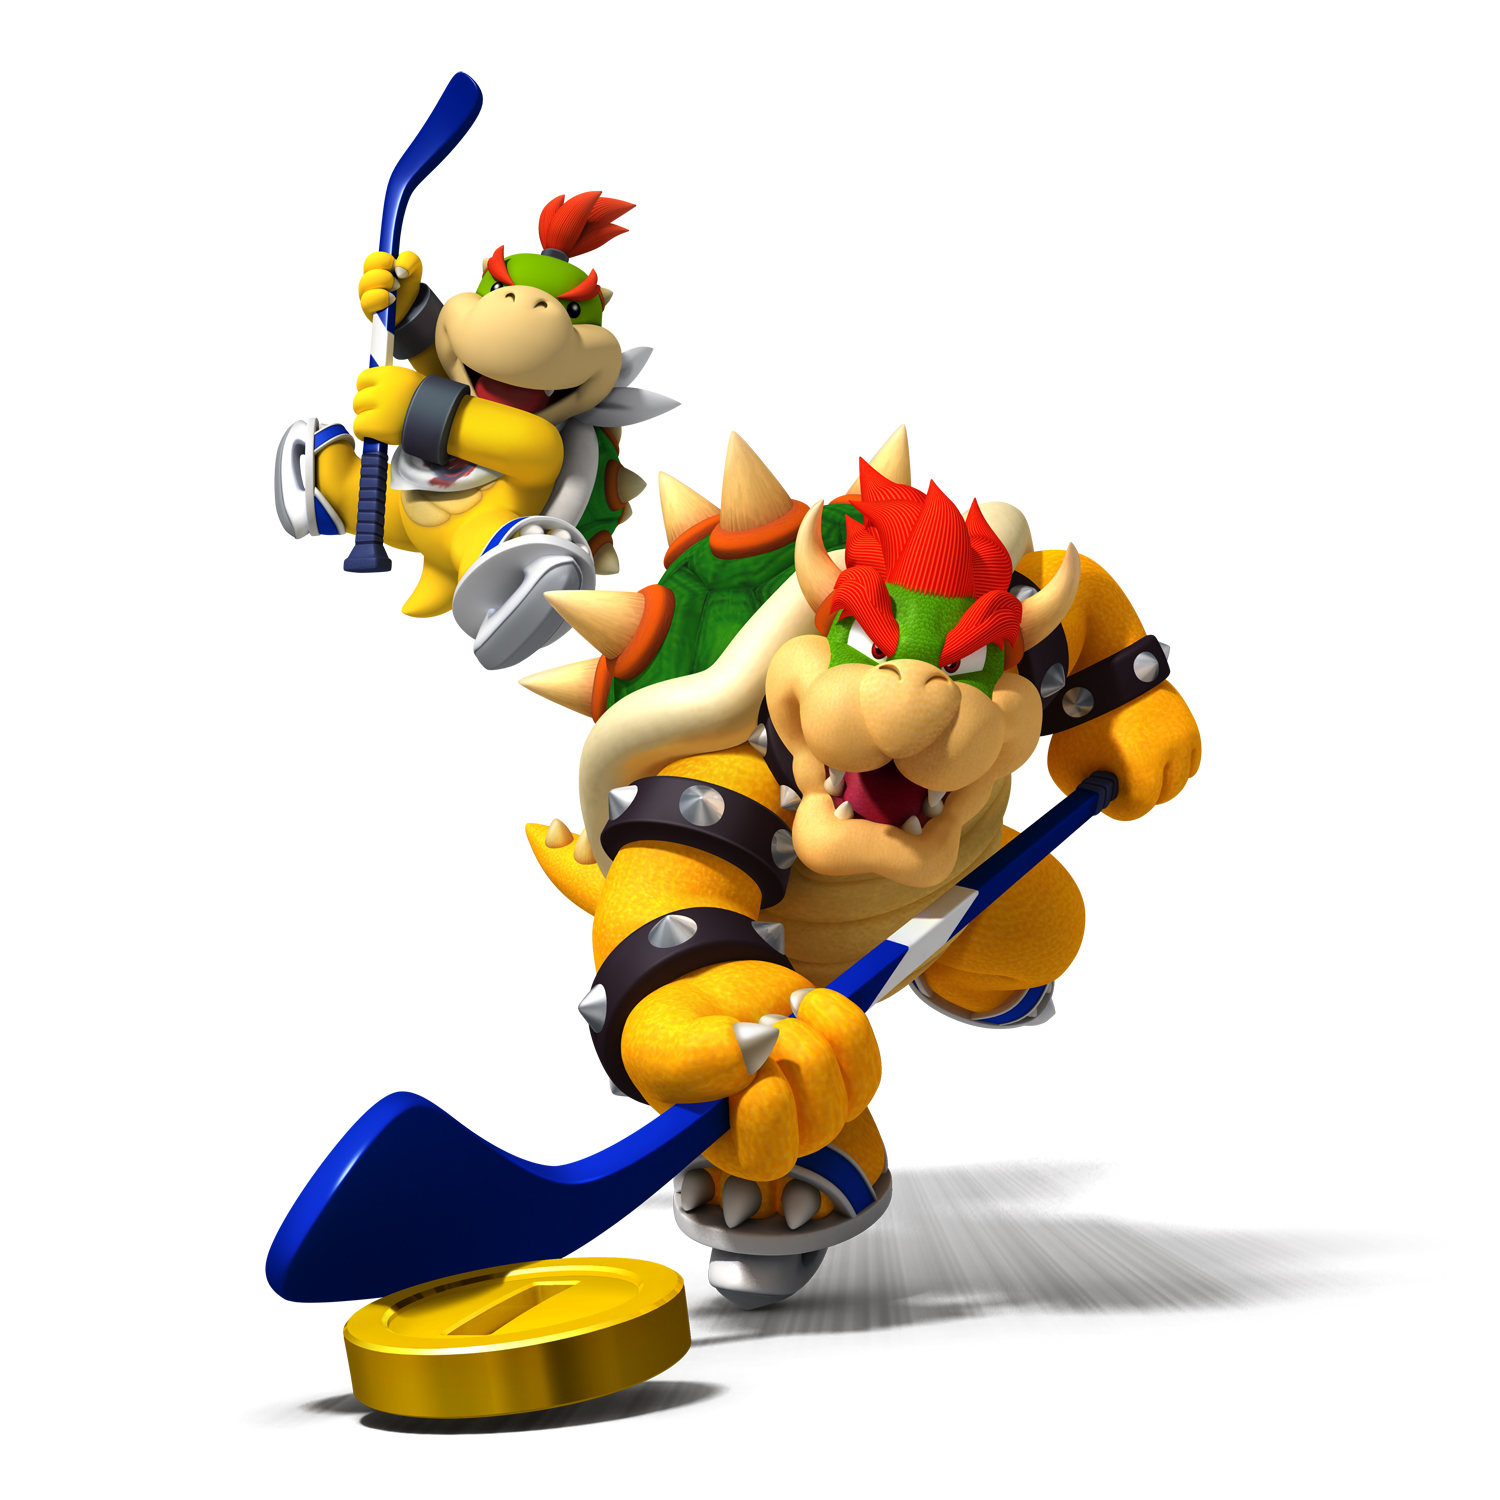 Bowser Jr. screenshots, image and pictures.